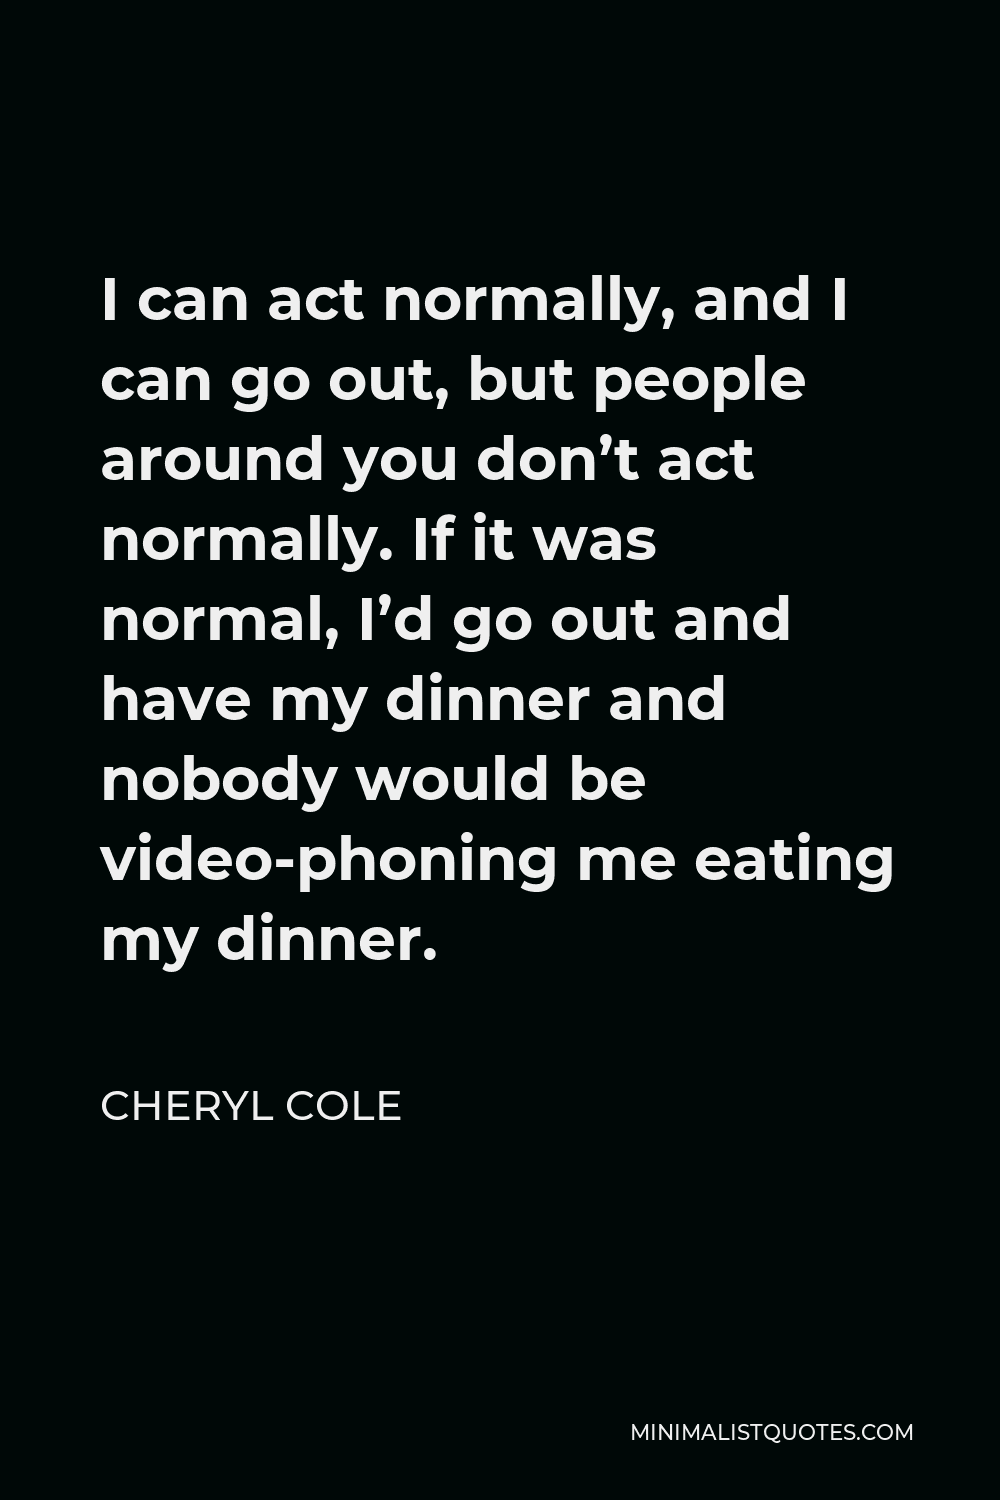 Cheryl Cole Quote - I can act normally, and I can go out, but people around you don’t act normally. If it was normal, I’d go out and have my dinner and nobody would be video-phoning me eating my dinner.